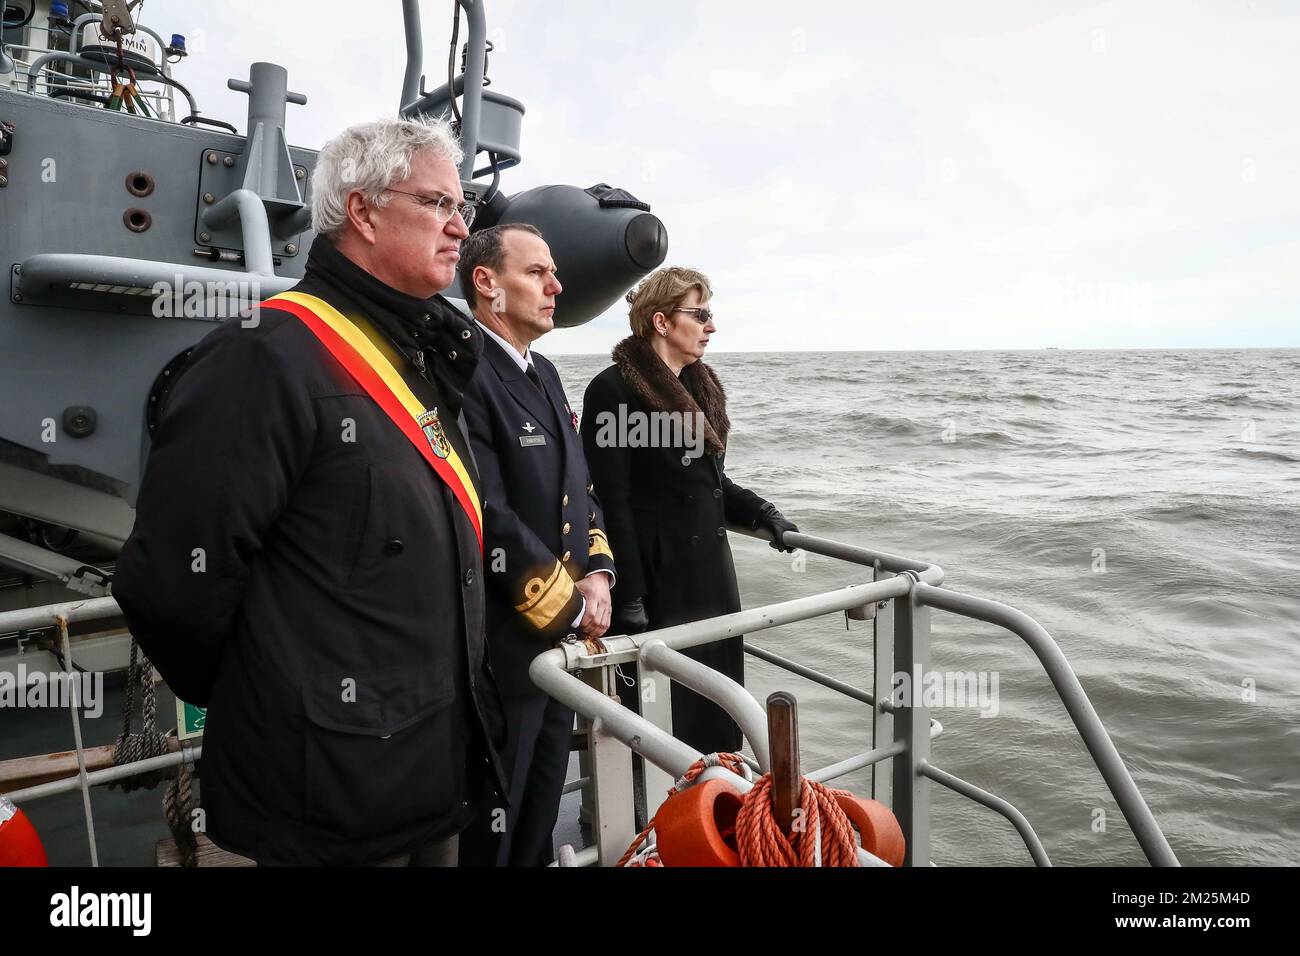 West-Flanders province governor Carl Decaluwe, Navy Commander Wim Robberecht and UK ambassador in Belgium, Alison Rose pictured during the 30th anniversary of the Herald of Free Enterprise ferry disaster, on Monday 06 March 2017 in Zeebrugge. On 6 March 1987 the ferry left the harbor of Zeebrugge, bound for Dover with more than 450 passengers and 80 crew members on board. It capsized just outside the harbor. The disaster, which was caused by the failure to close the bow doors, cost the life of 194 people. BELGA PHOTO KURT DESPLENTER Stock Photo